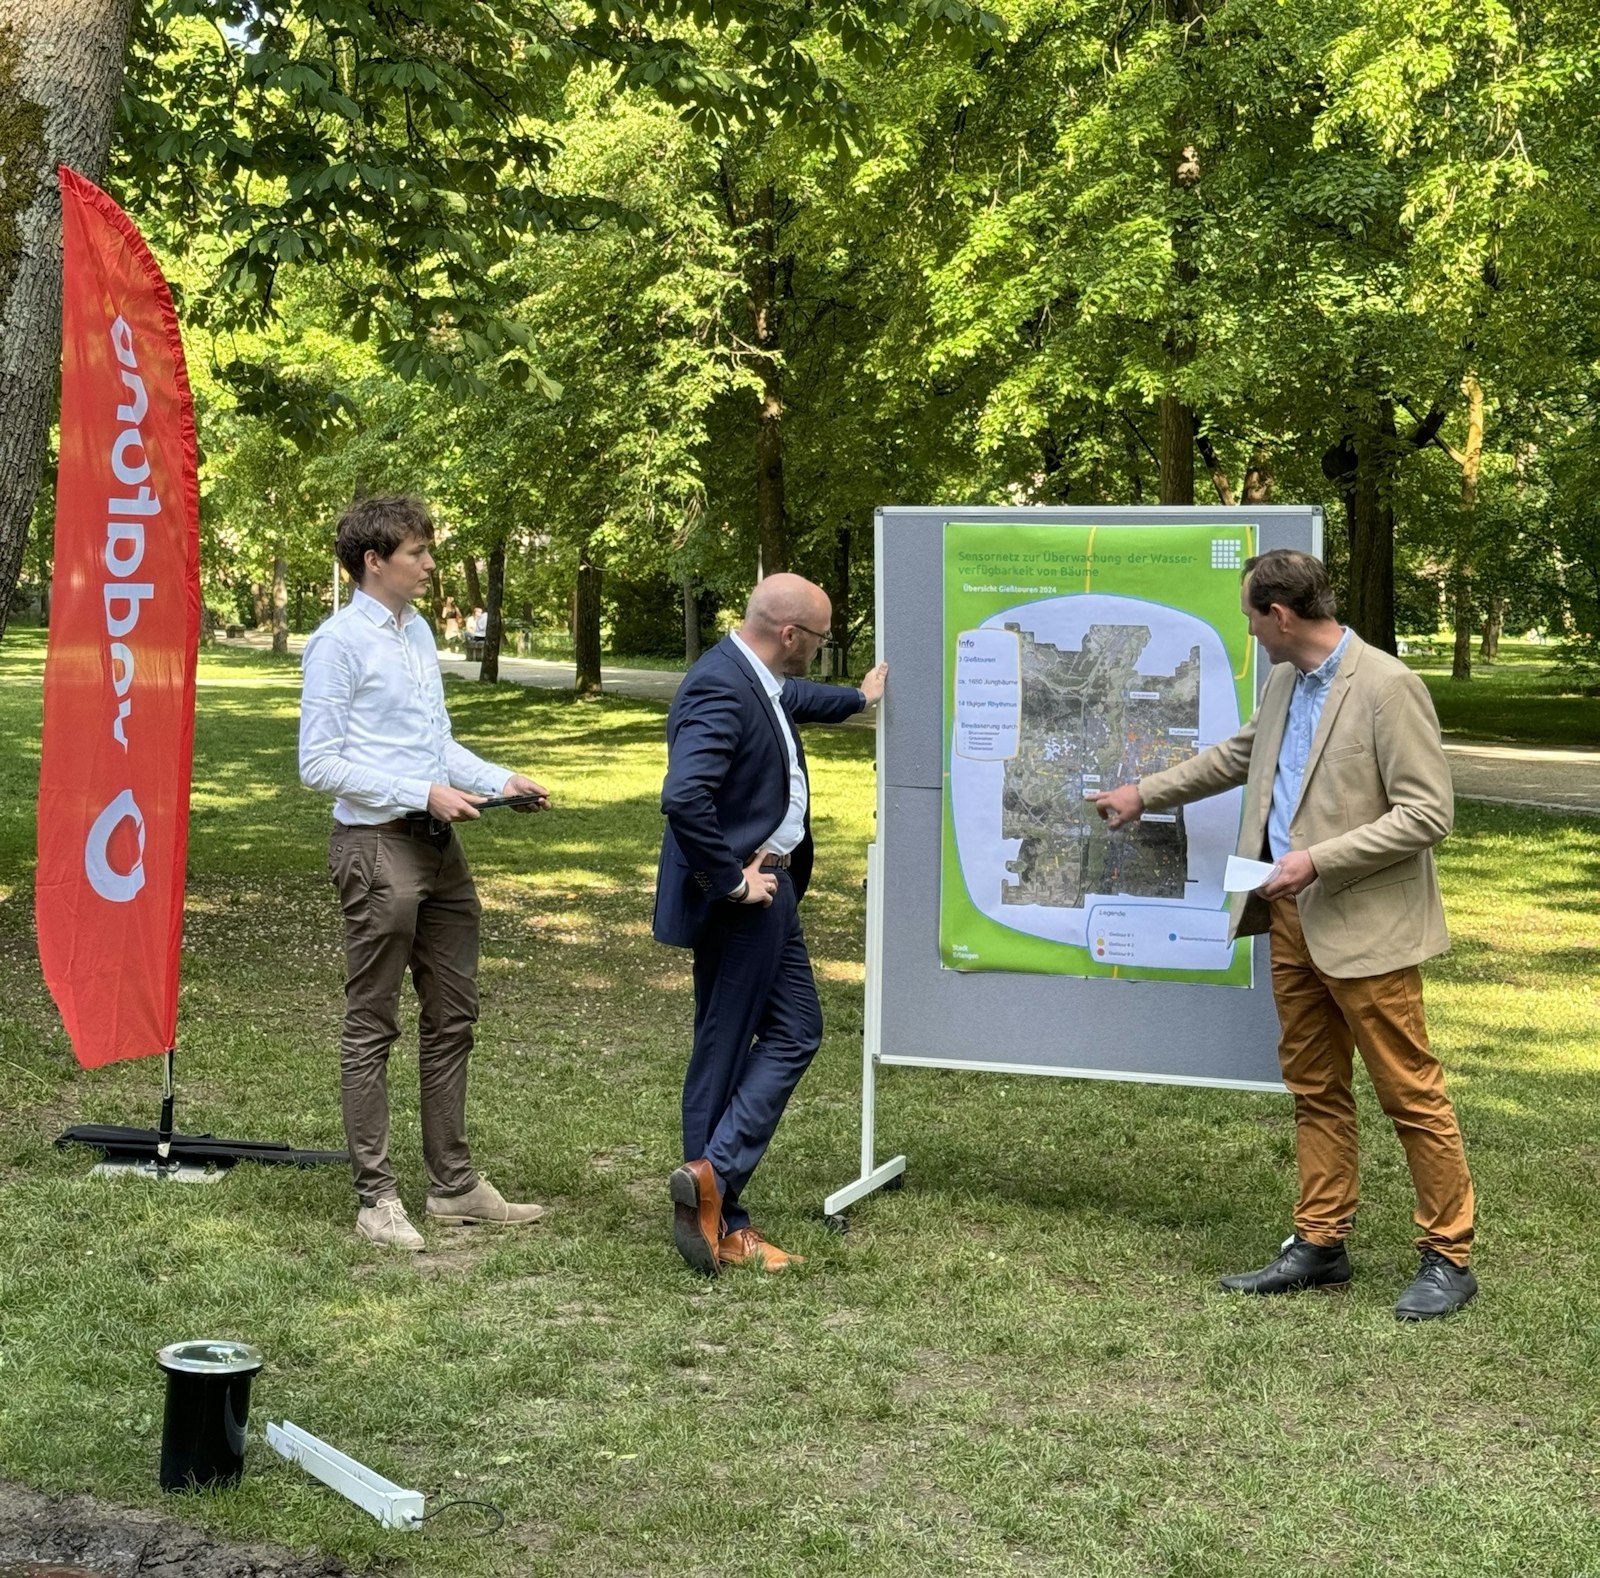 Vodafone Germany uses digital twins to protect trees against extreme heat